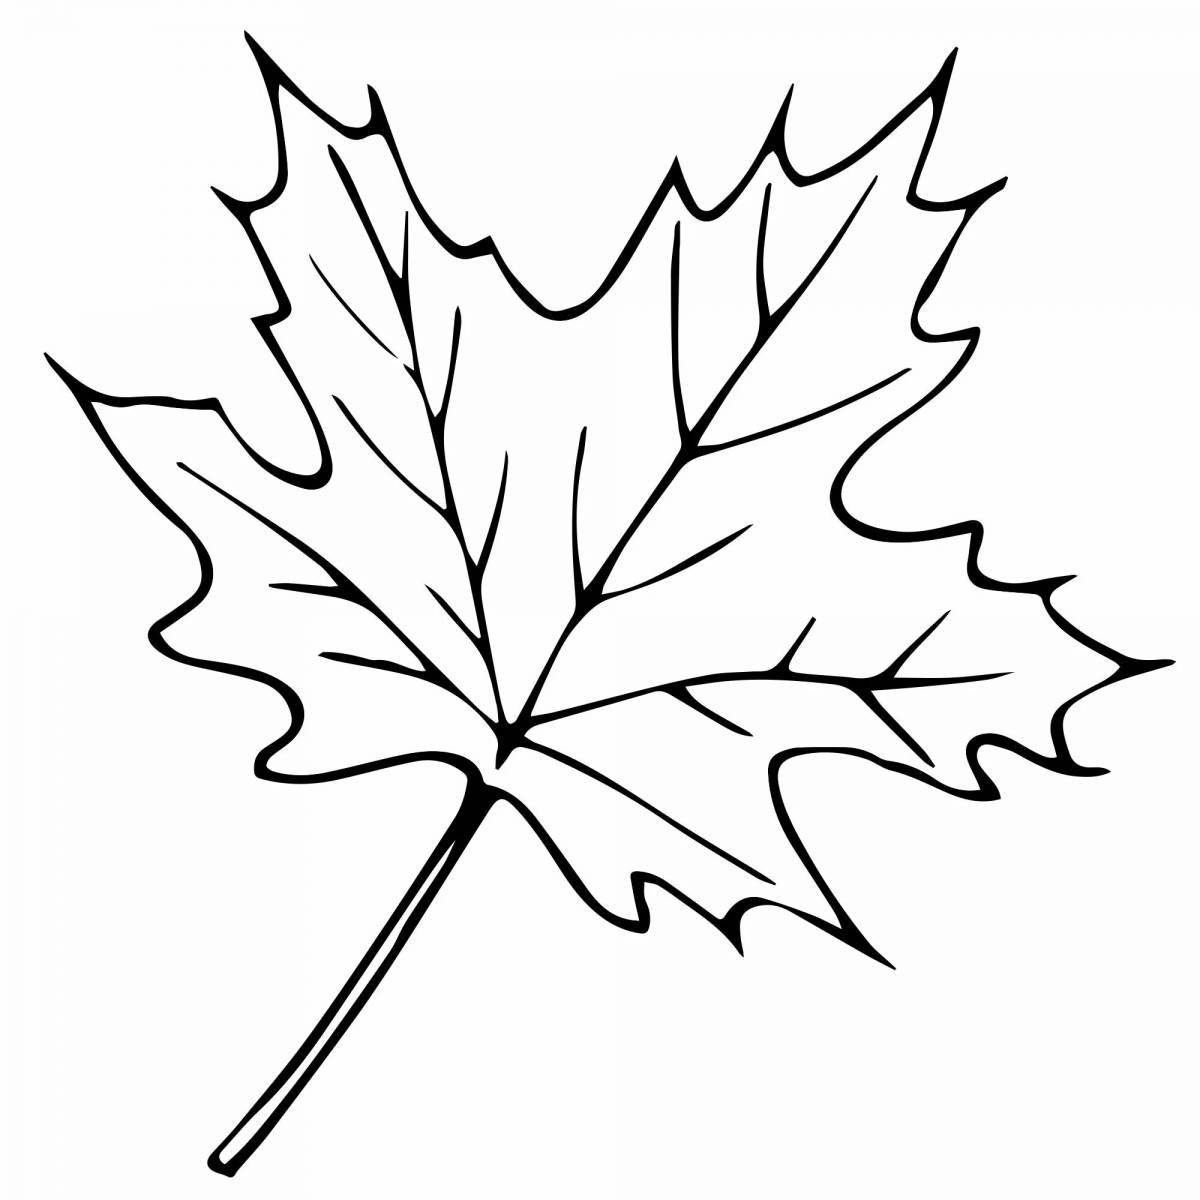 Radiant leaves coloring pages for kids